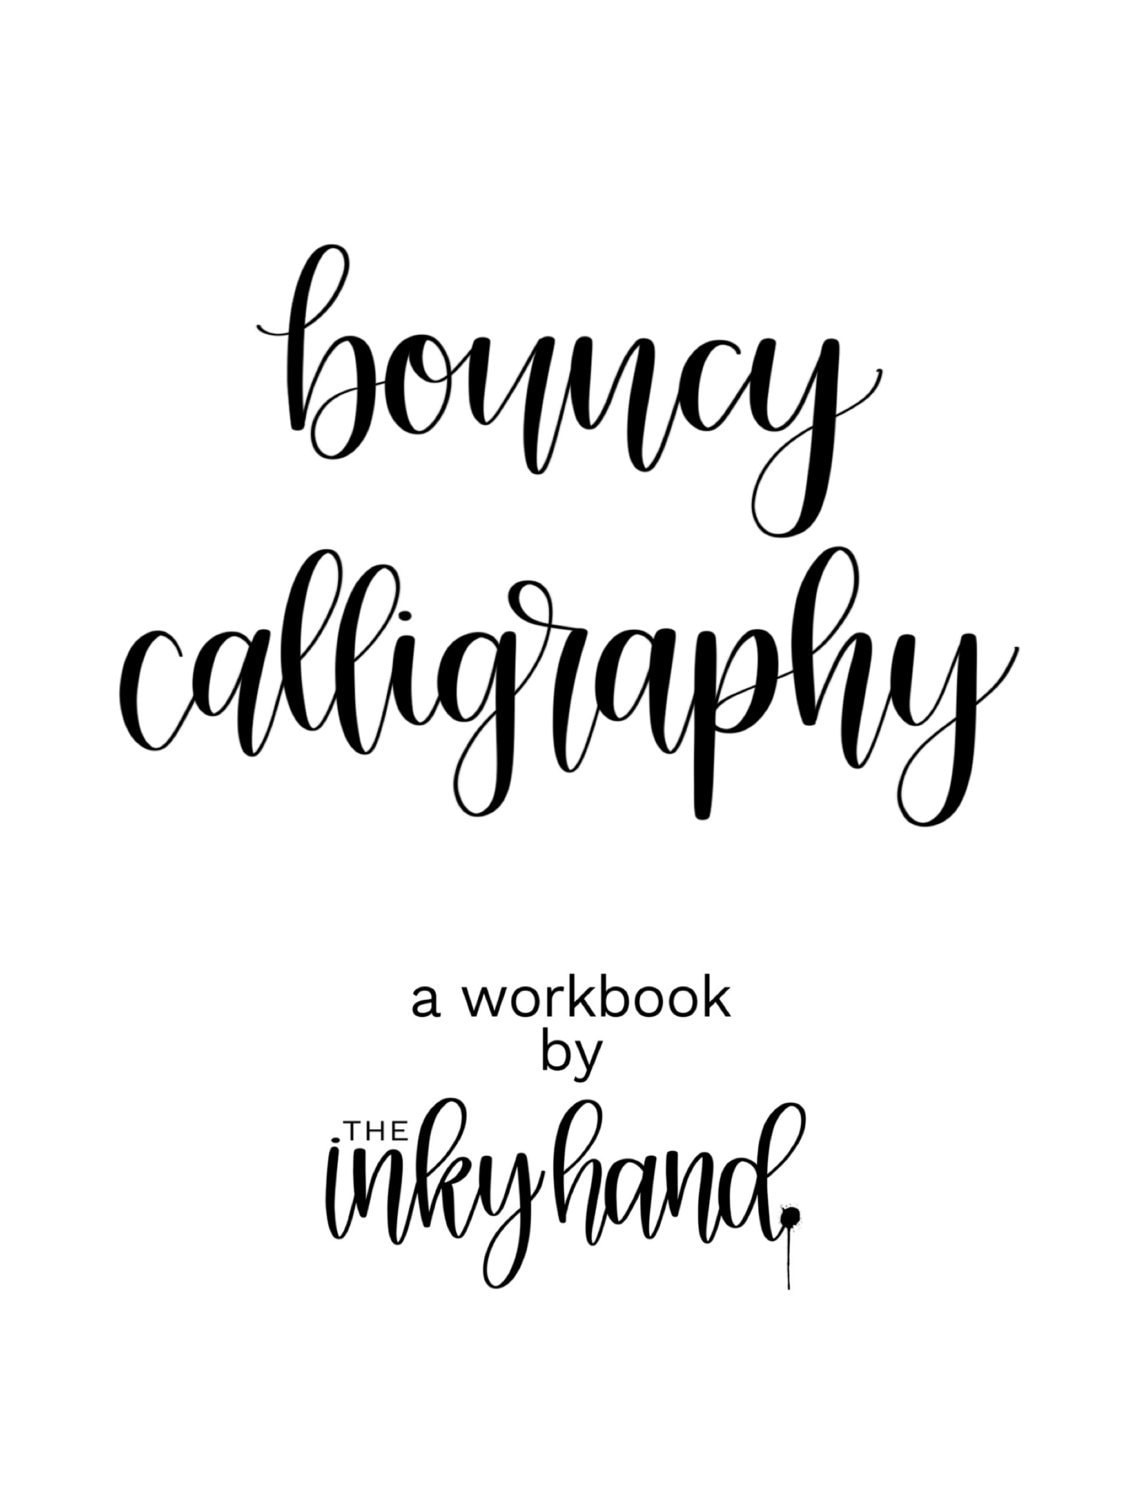 Simplistic Calligraphy Style Workbook - Digital Worksheets Pdf Download -  Modern Calligraphy Kits and Classes, Calligraphy Inks